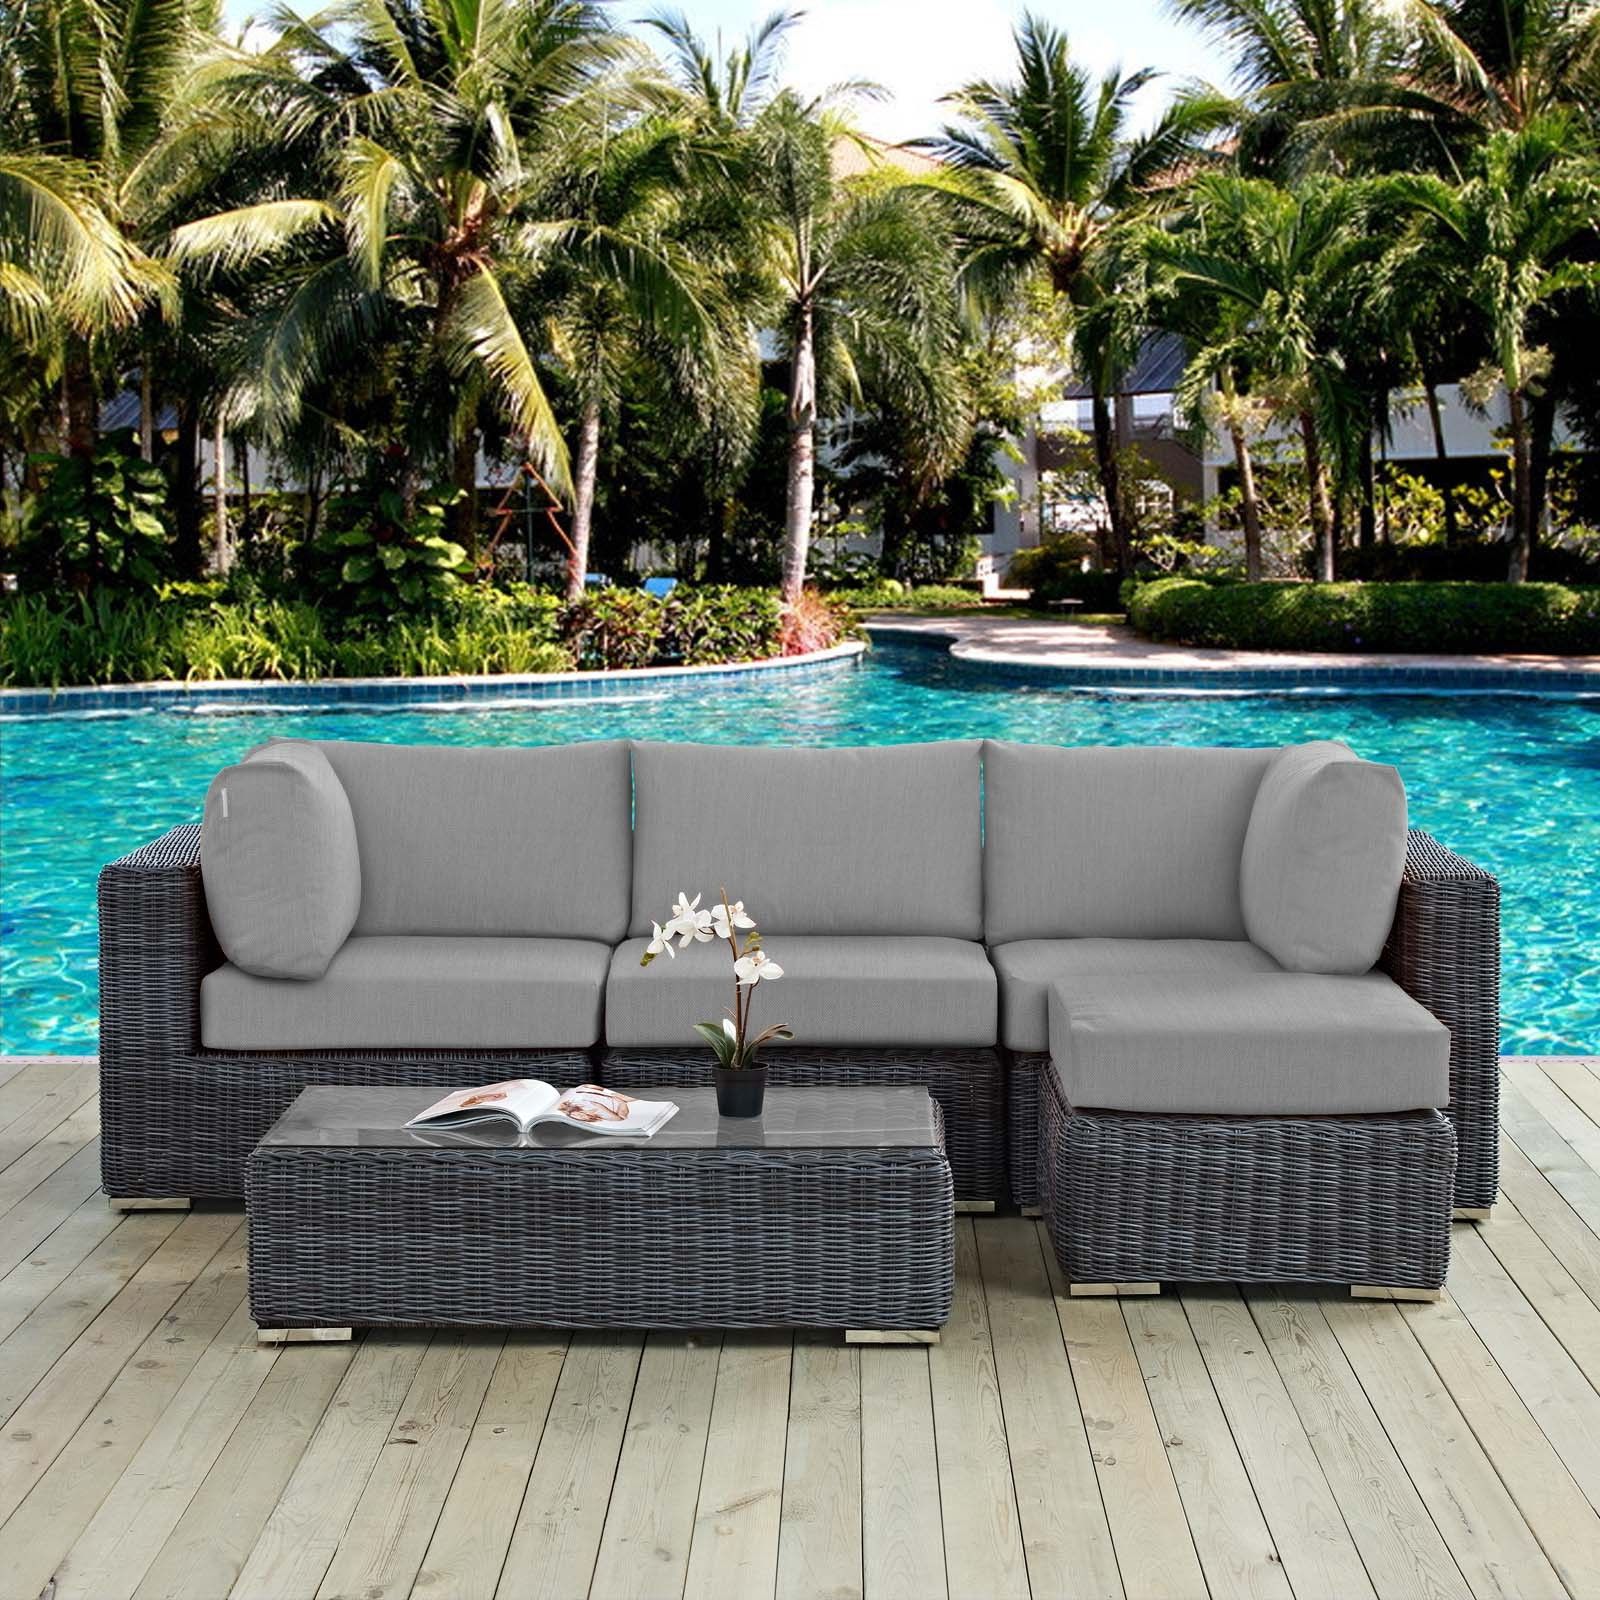 Outdoor Seating Sectional Patio Sets With Trendy Summon Canvas Gray 5 Piece Outdoor Patio Sunbrella Sectional Set Eei (View 3 of 15)